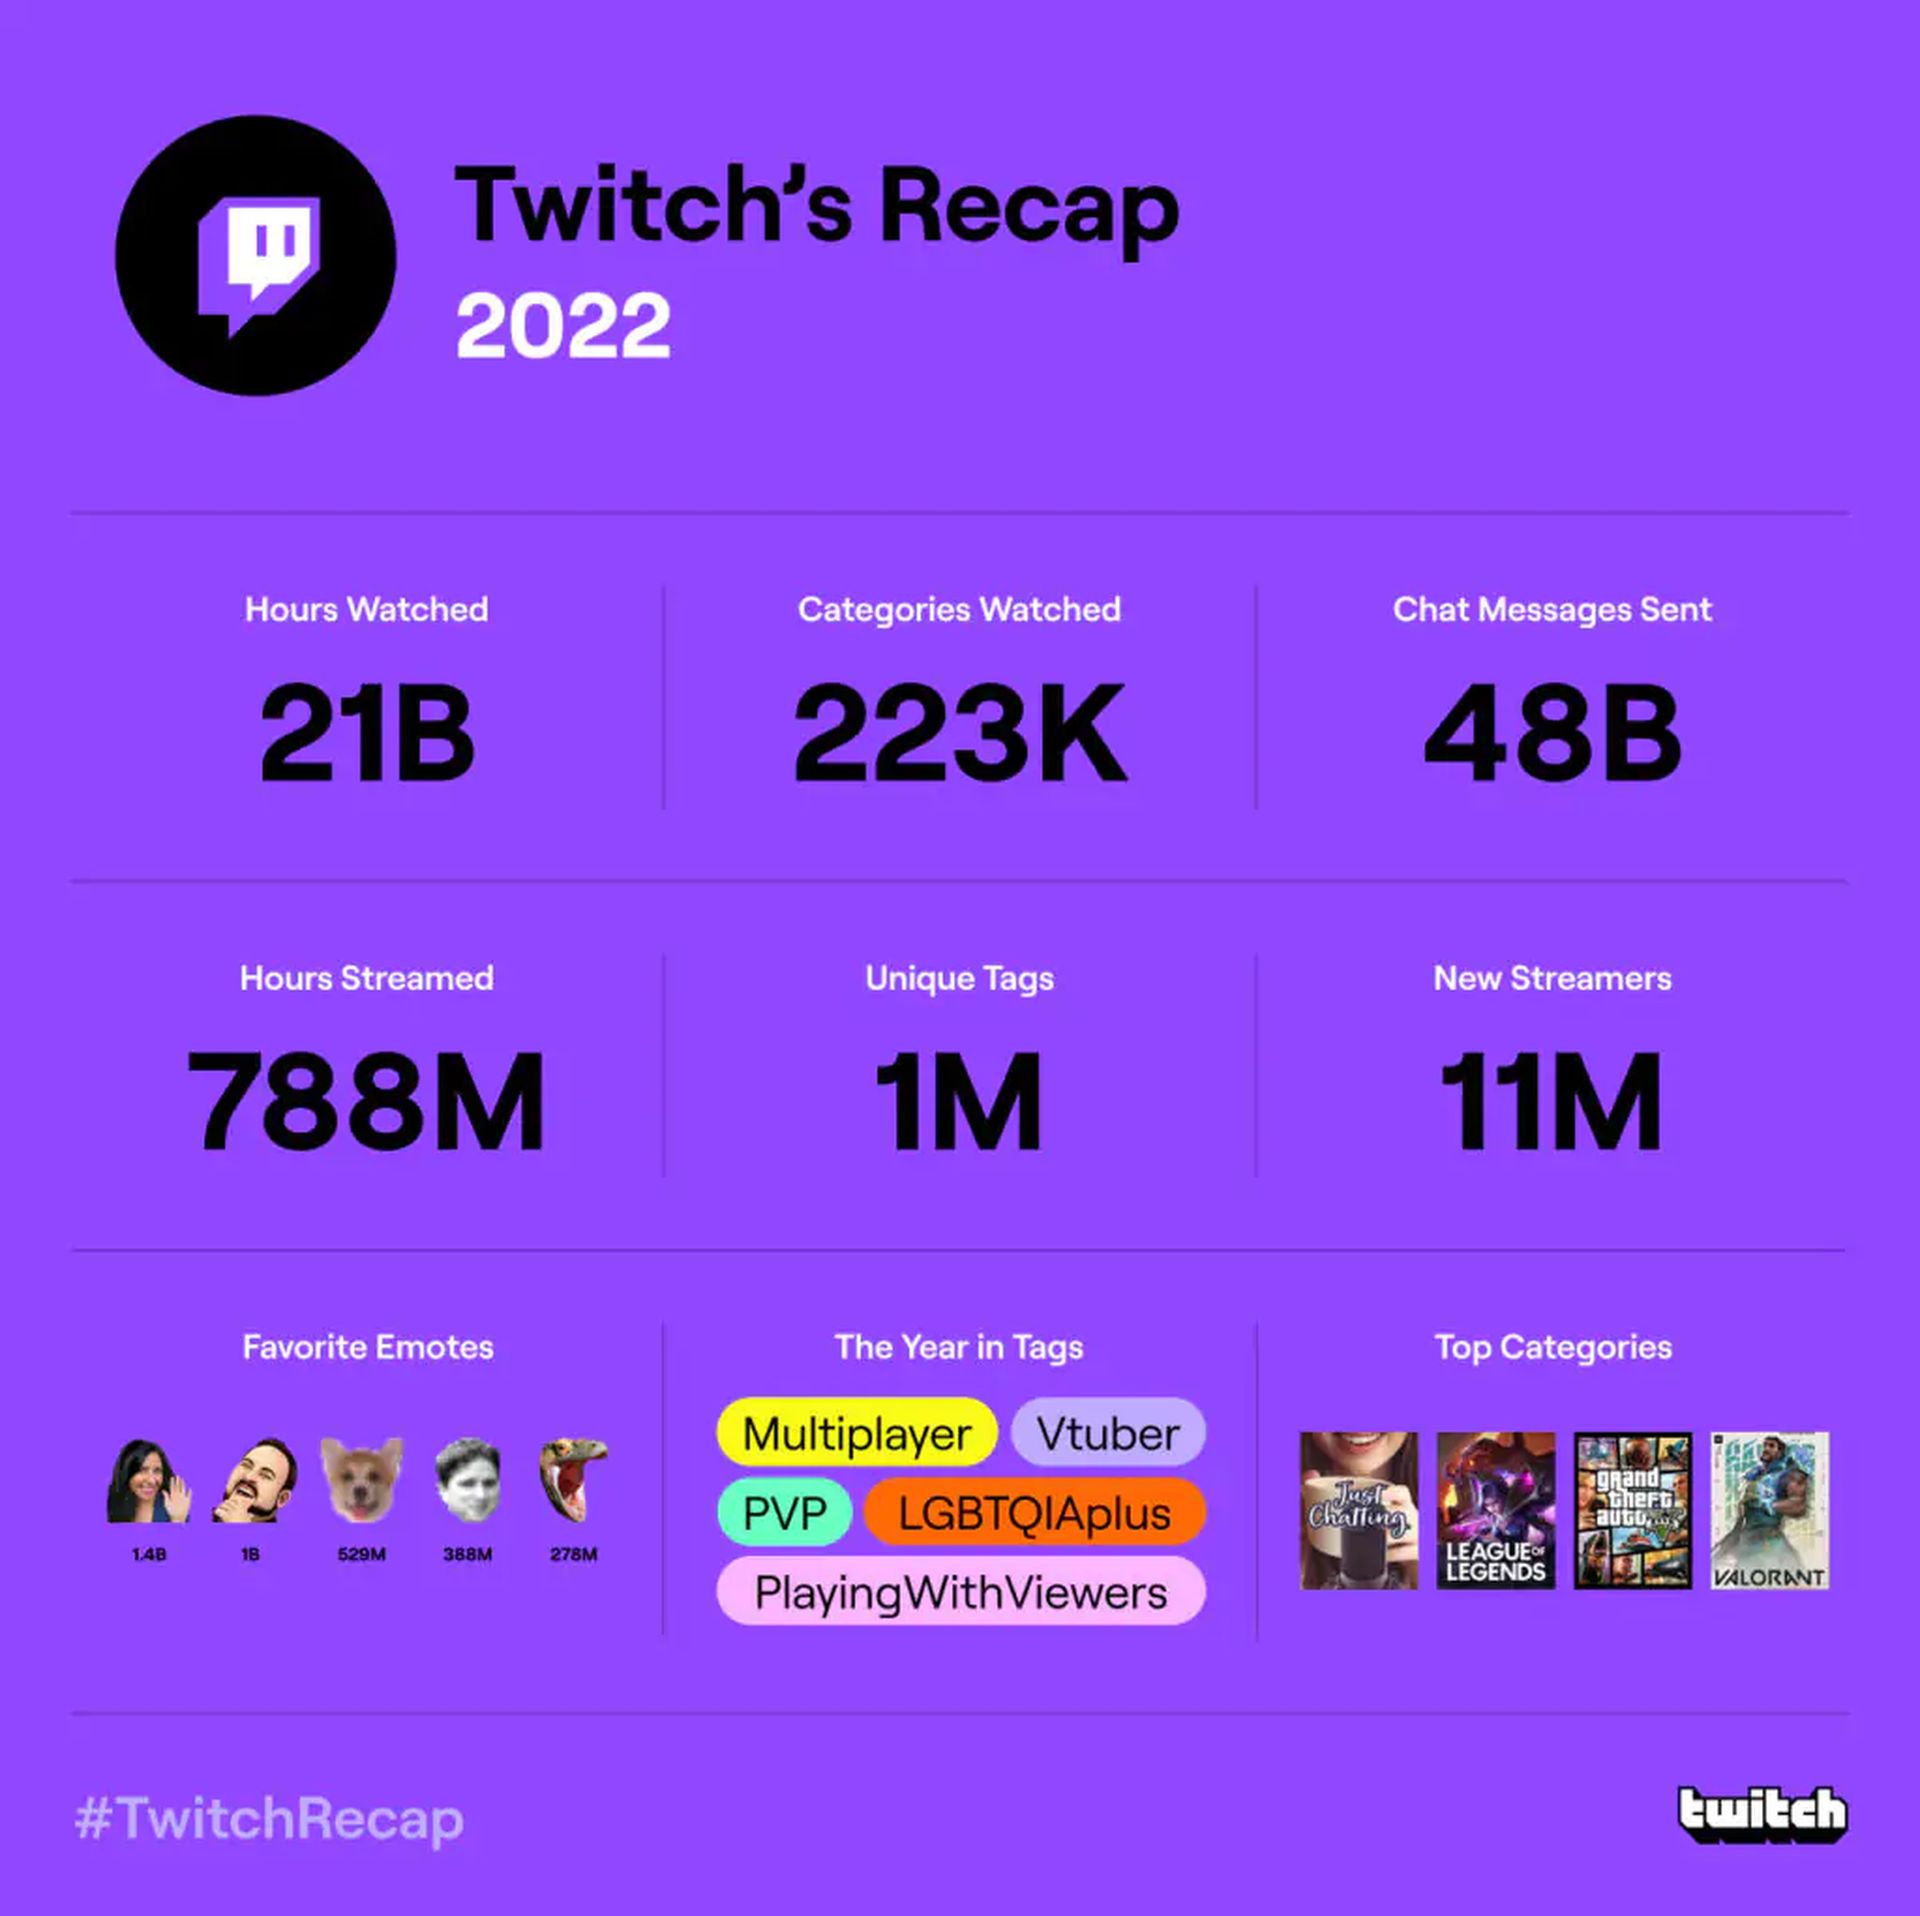 Twitch recap 2022 not working How to fix it? • TechBriefly